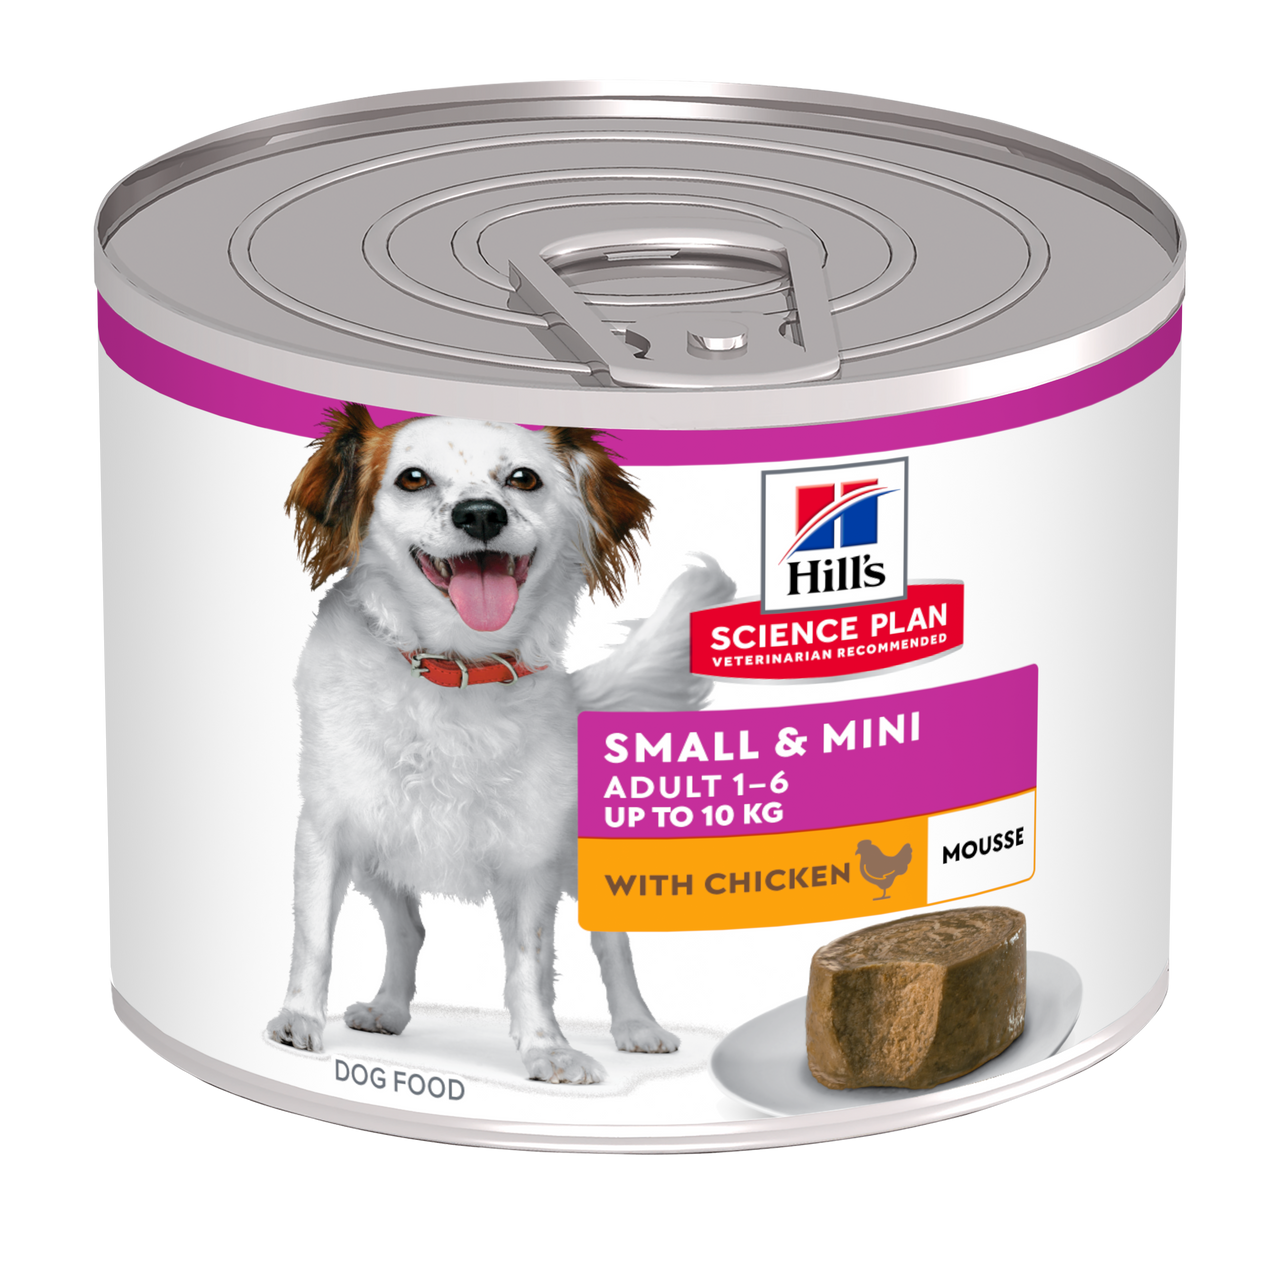 Small & Mini Adult Mousse Hundfoder med Kyckling – 12 x 200 g